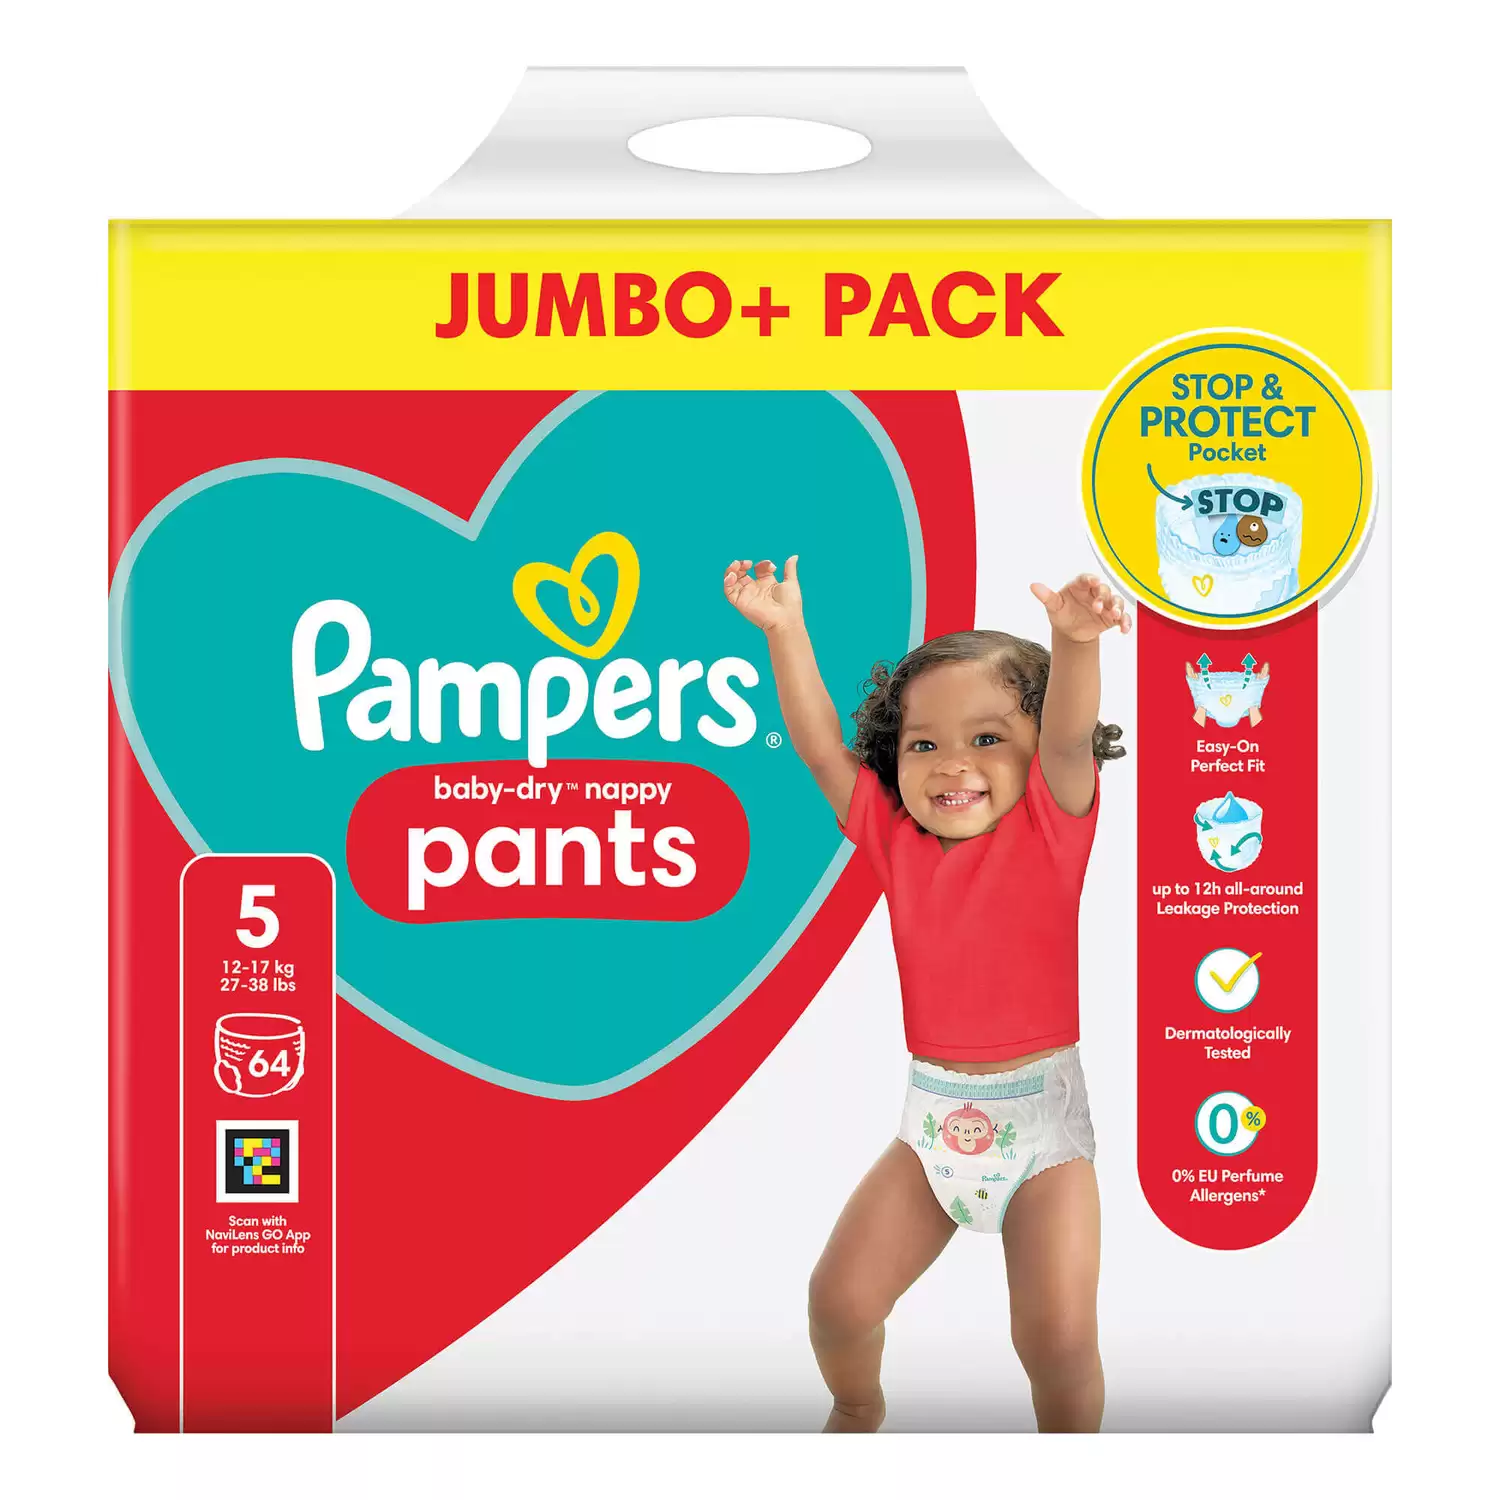 https://www.gompels.co.uk/image/cache/data/78863-pampers-baby-dry-nappy-pants-size-5-64-pack-1500x1500.webp